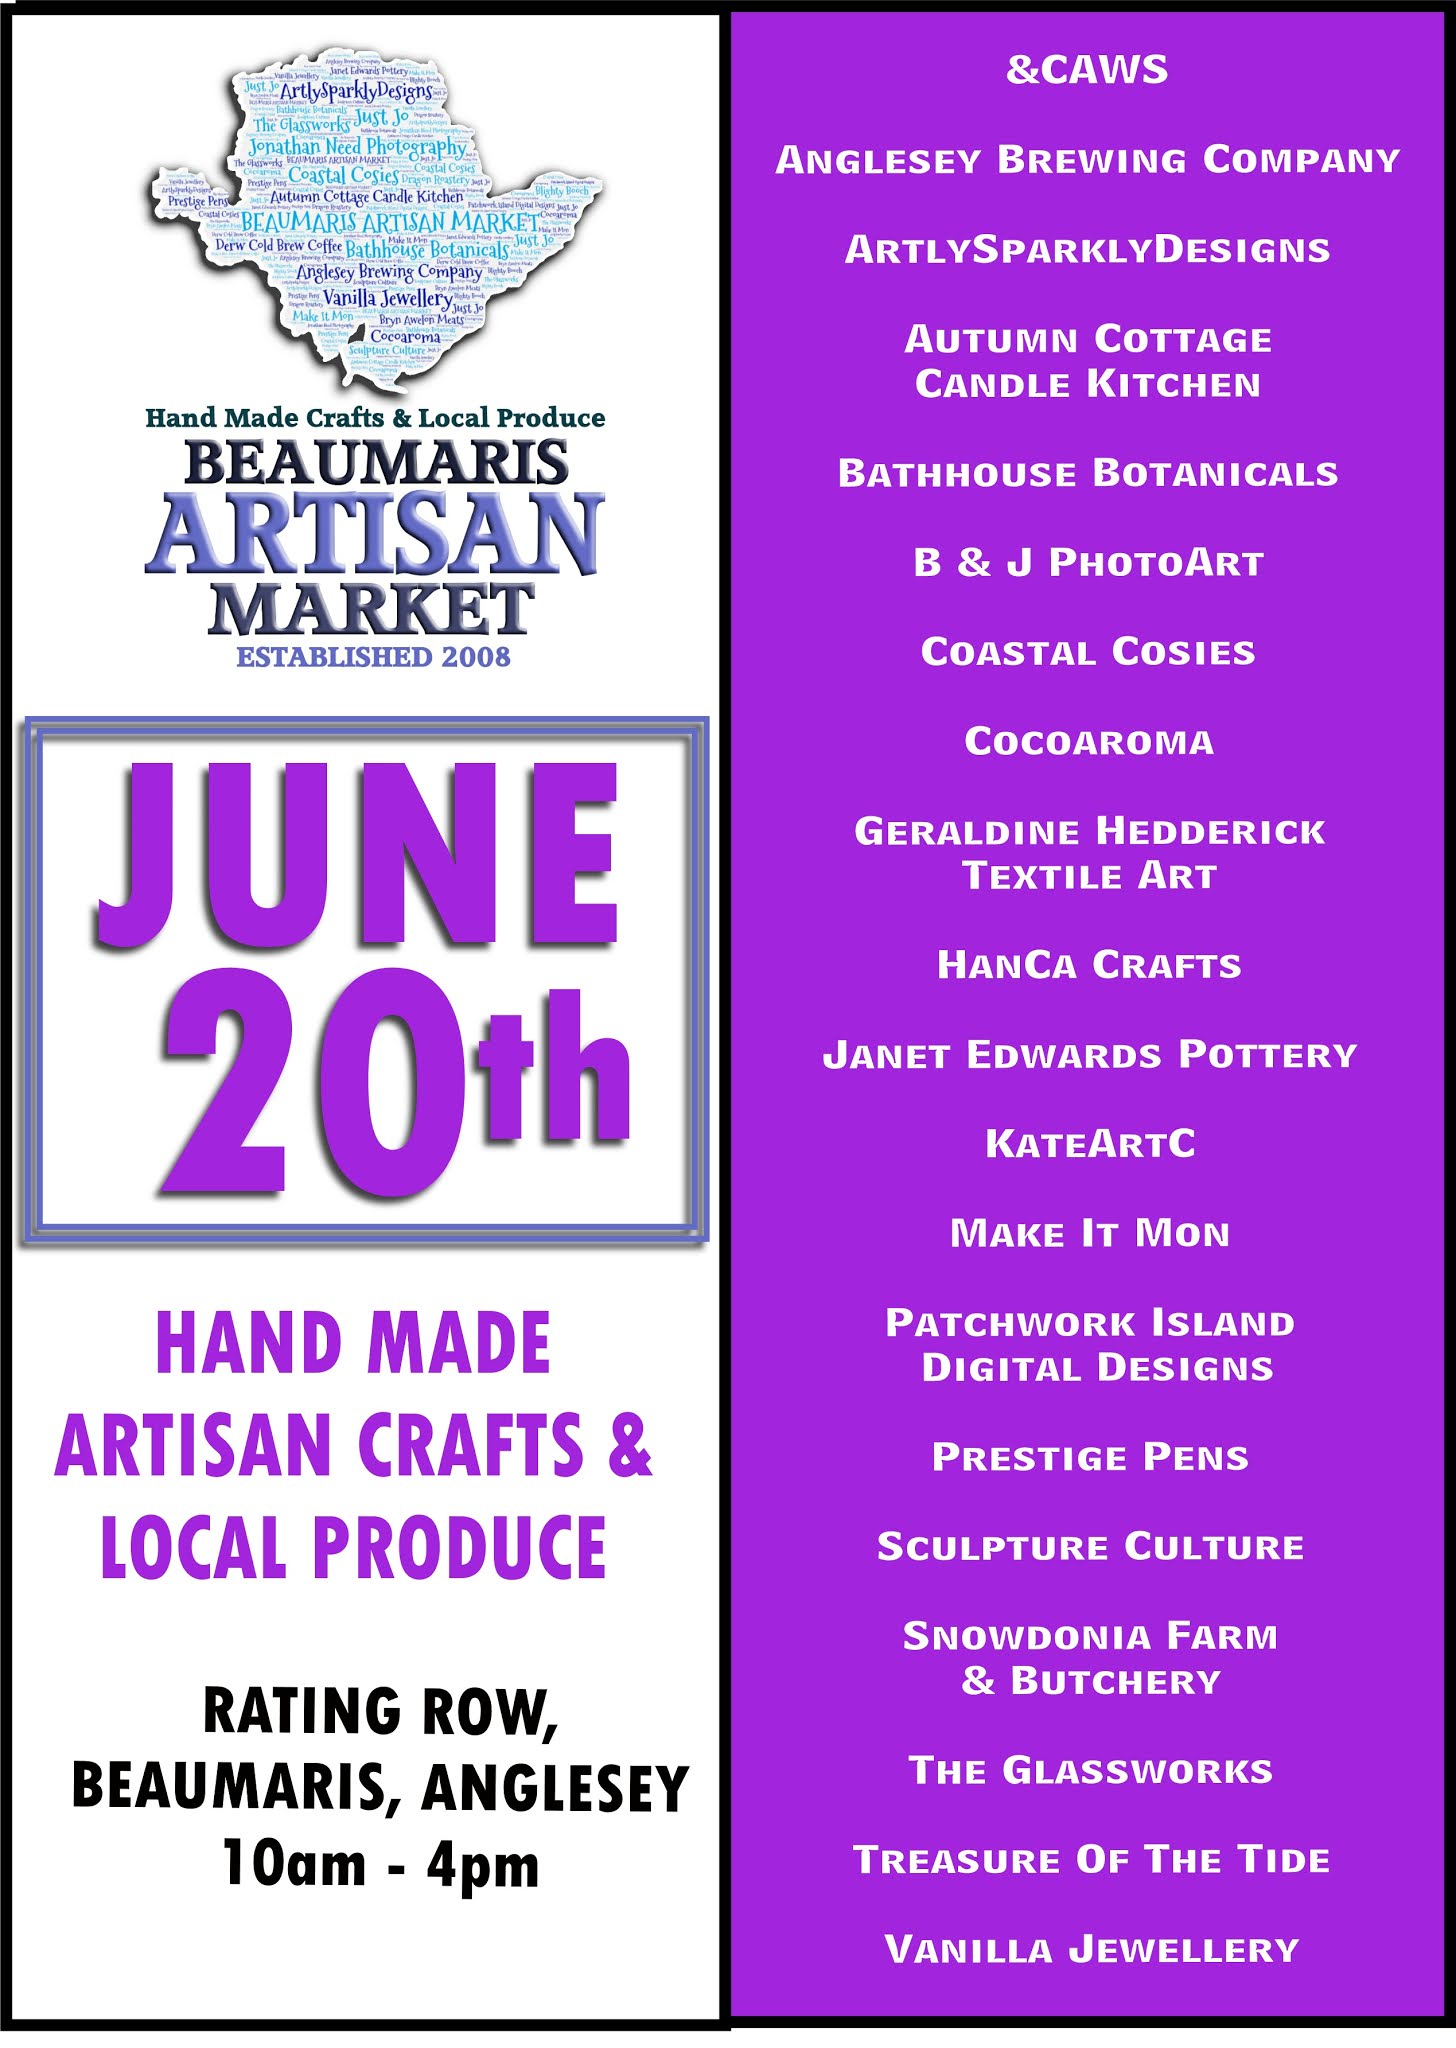 Beaumaris Artisan Market: Our next market is a two day weekend event ...